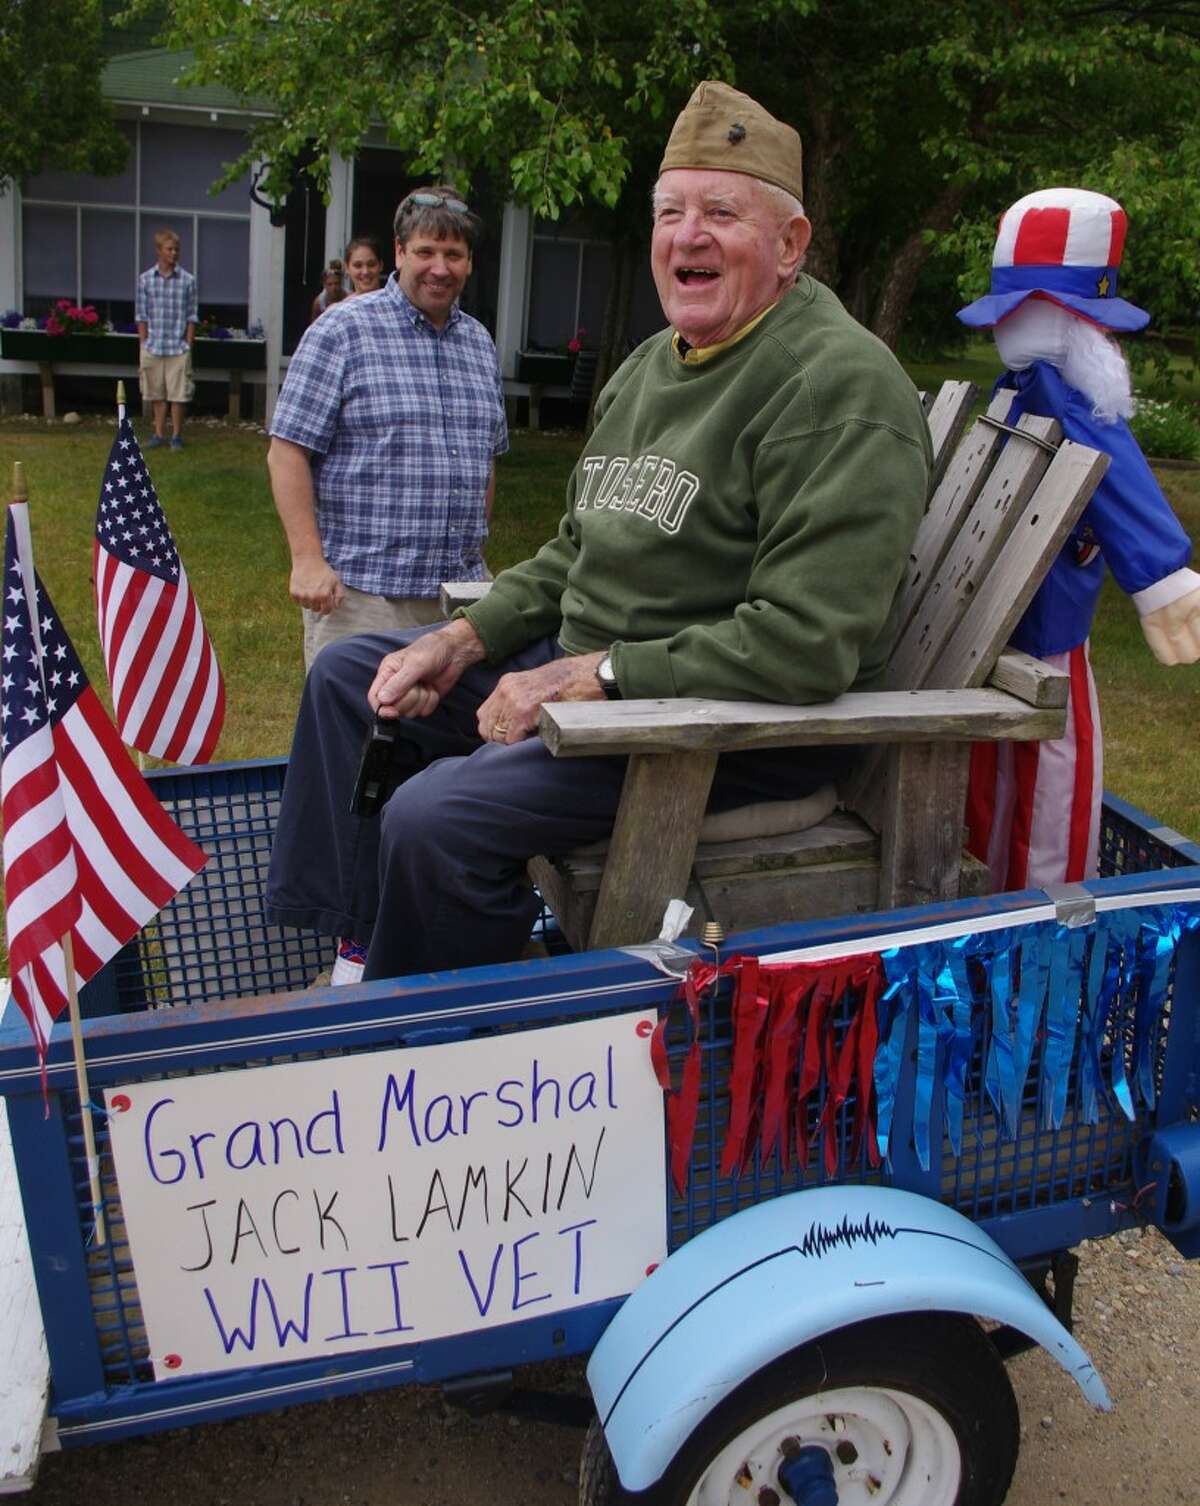 Even though the parade was just for fun, the Portage Lake south shore residents staging an Independence Day Parade on July 3 were serious when they honored Jack Lamkin, a 92-year-old World War II veteran, by making him the grand marshal. (Dave Yarnell/News Advocate)